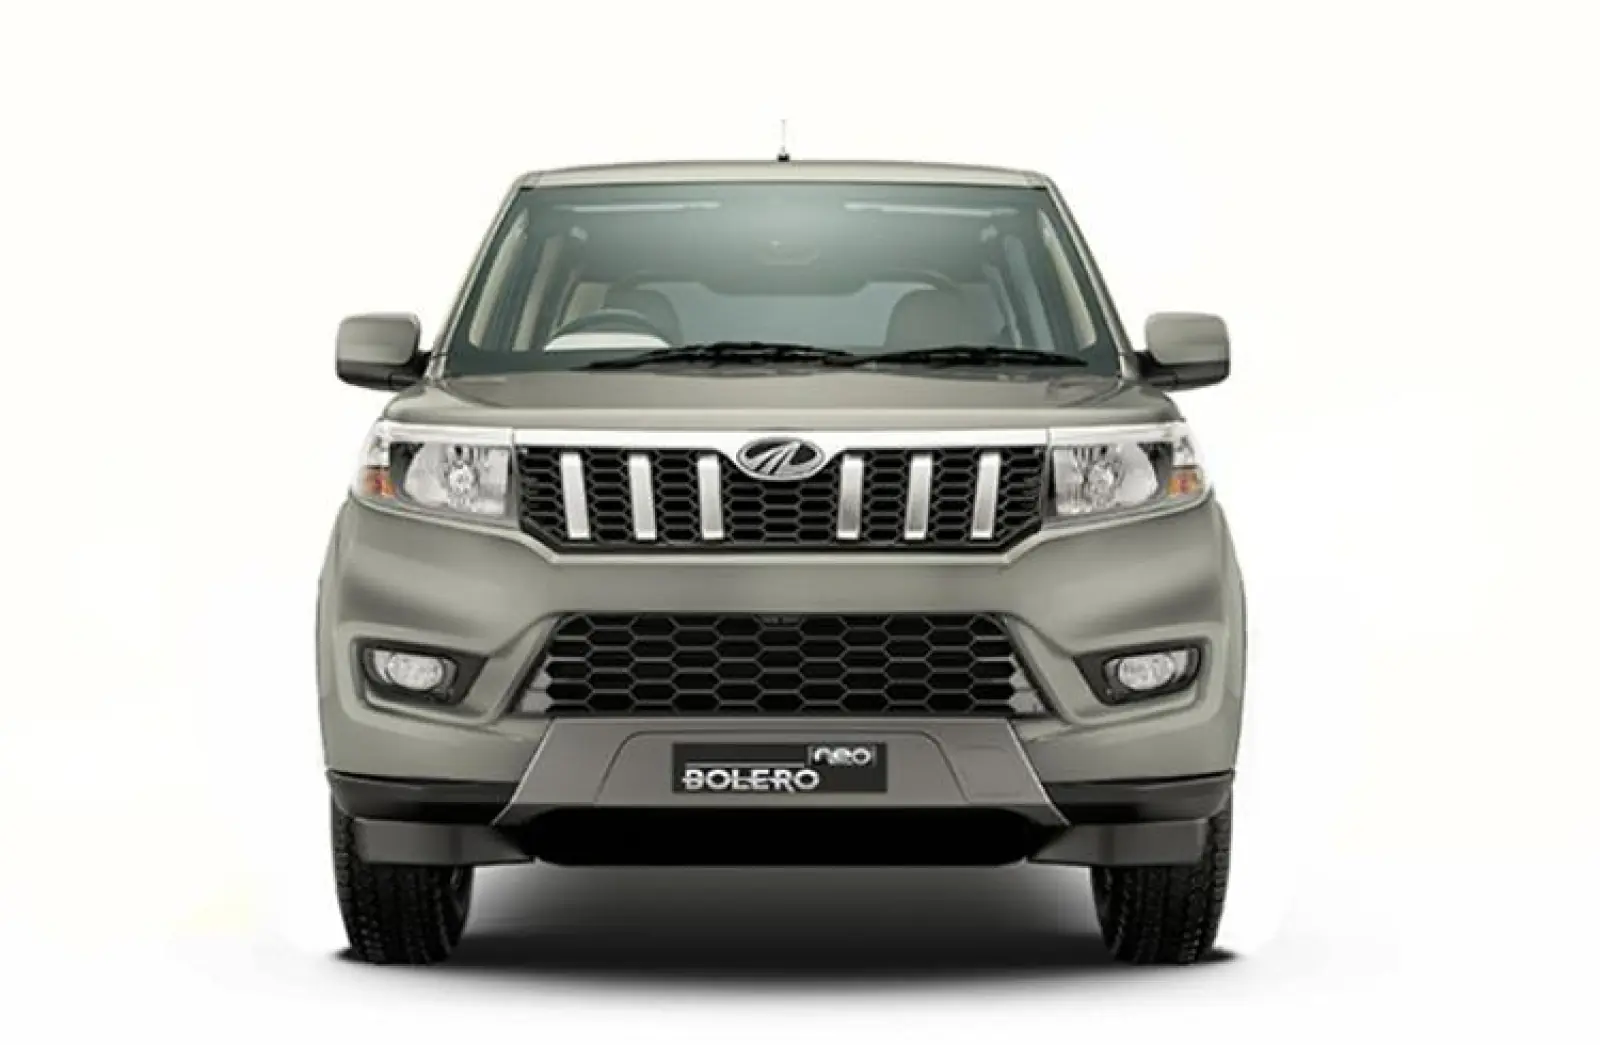 Demand for Mahindra Bolero and Neo increased in the market, more than 11 thousand bookings done